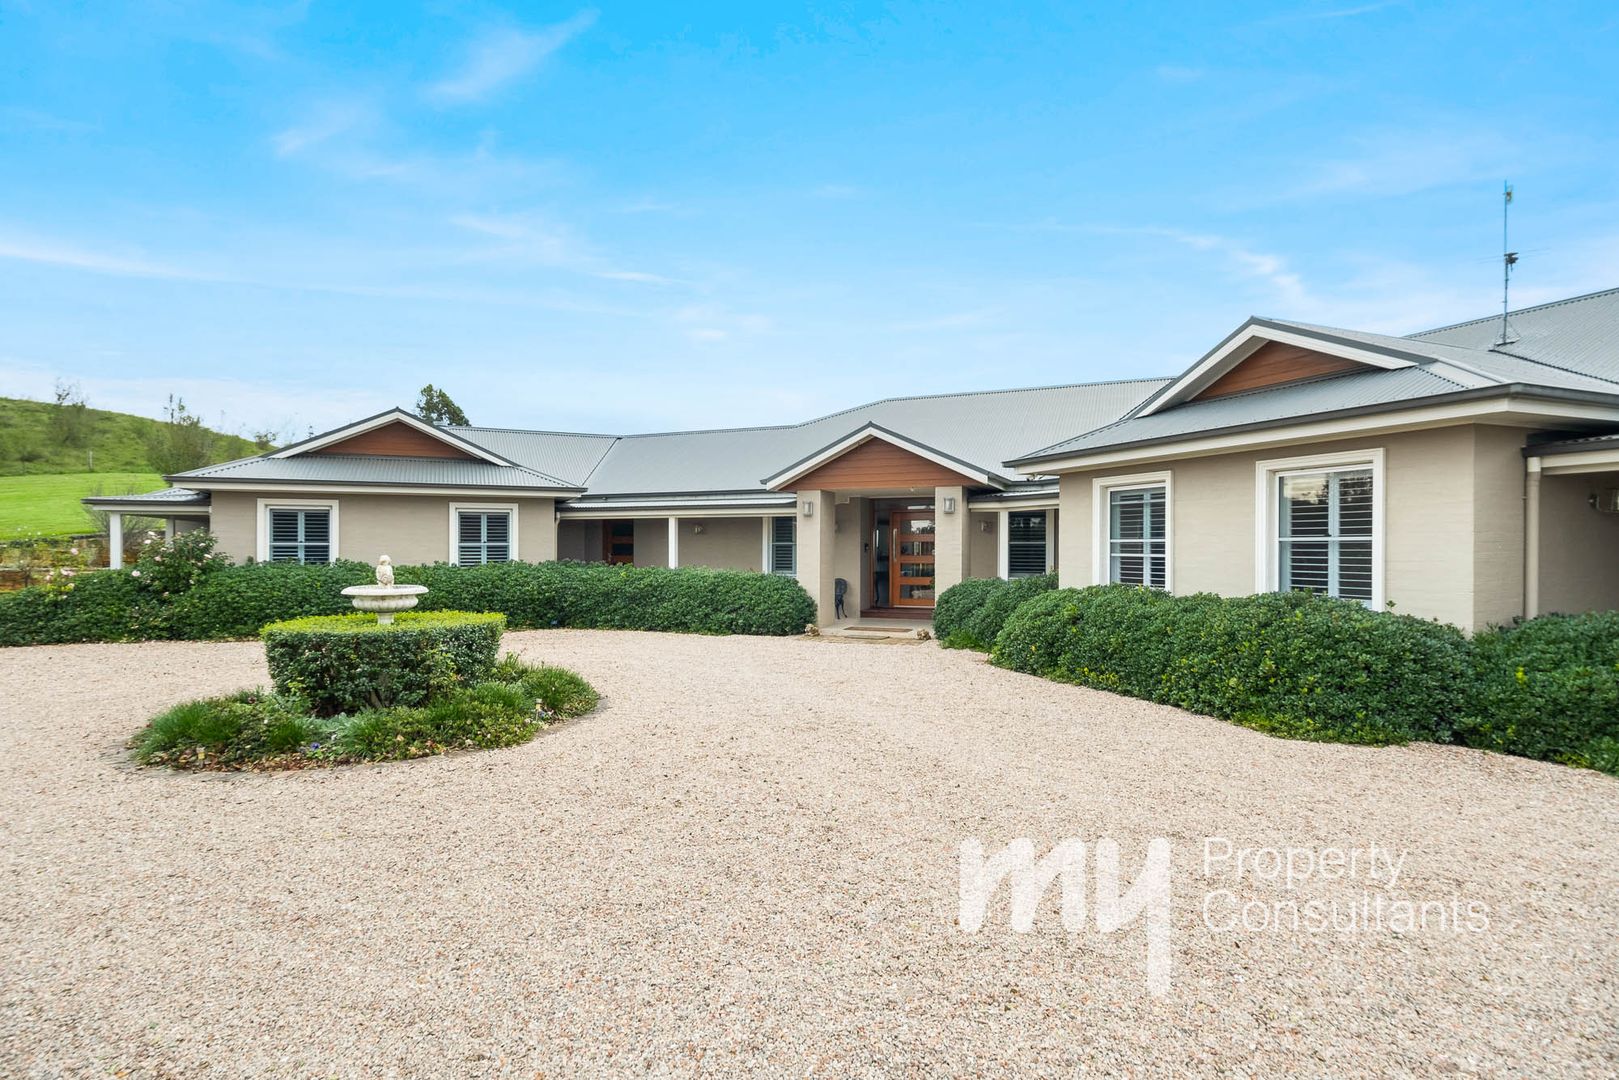 3/135 Moores Way, Glenmore NSW 2570, Image 2